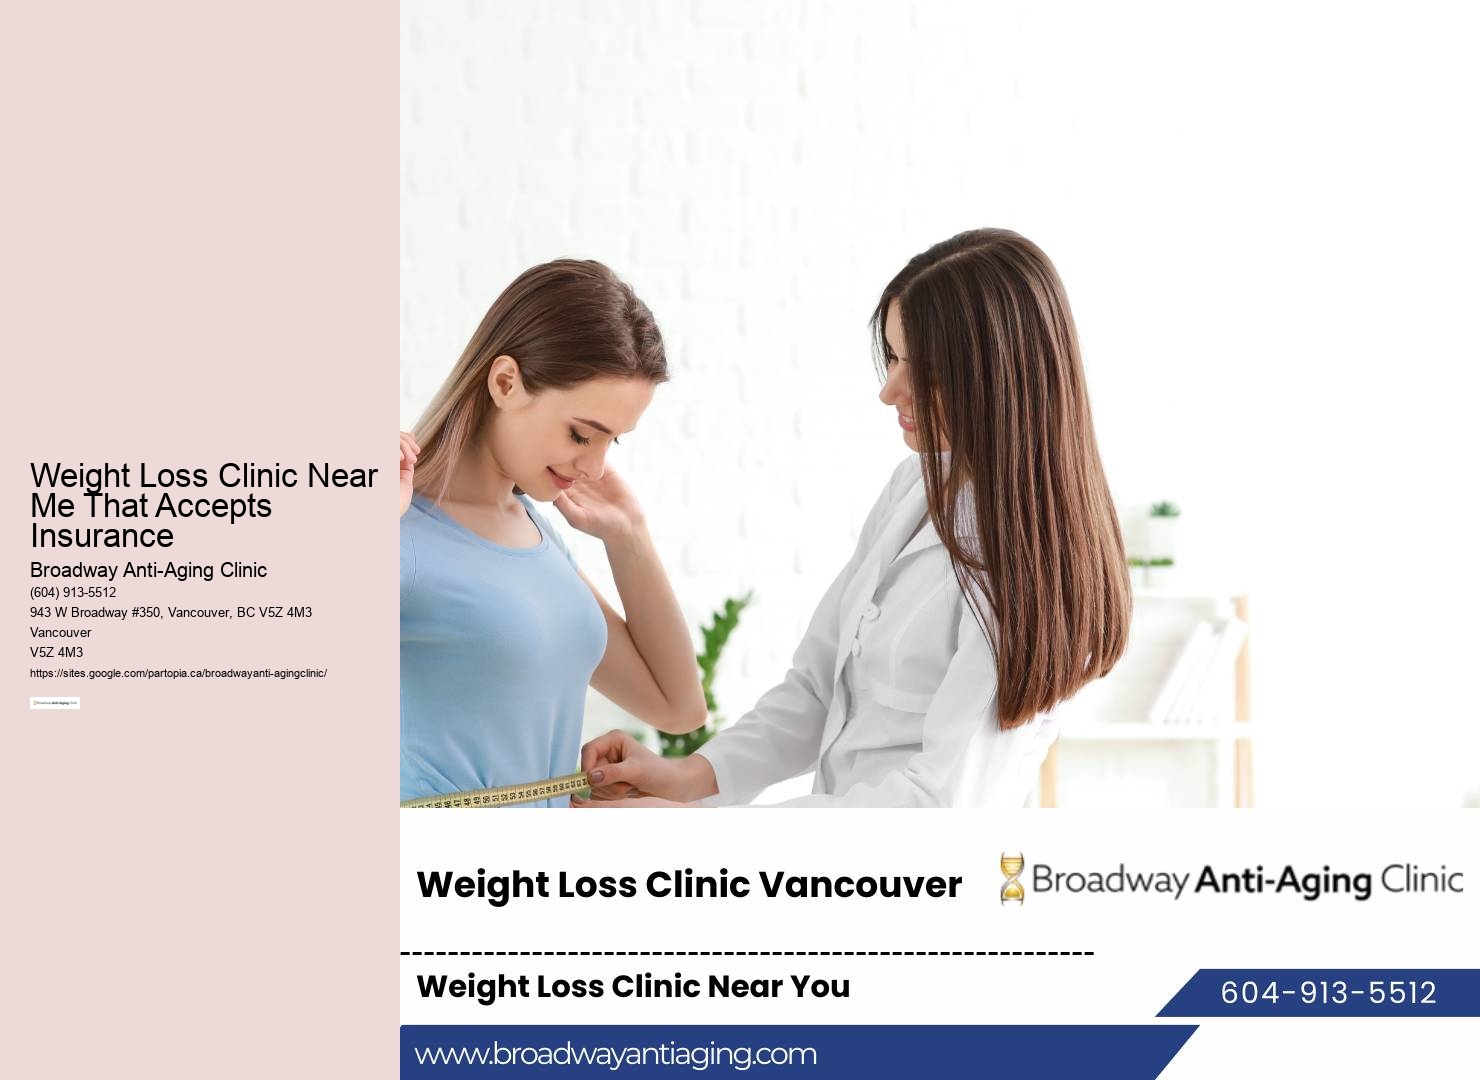 Weight Loss Clinic Near Me That Accepts Insurance